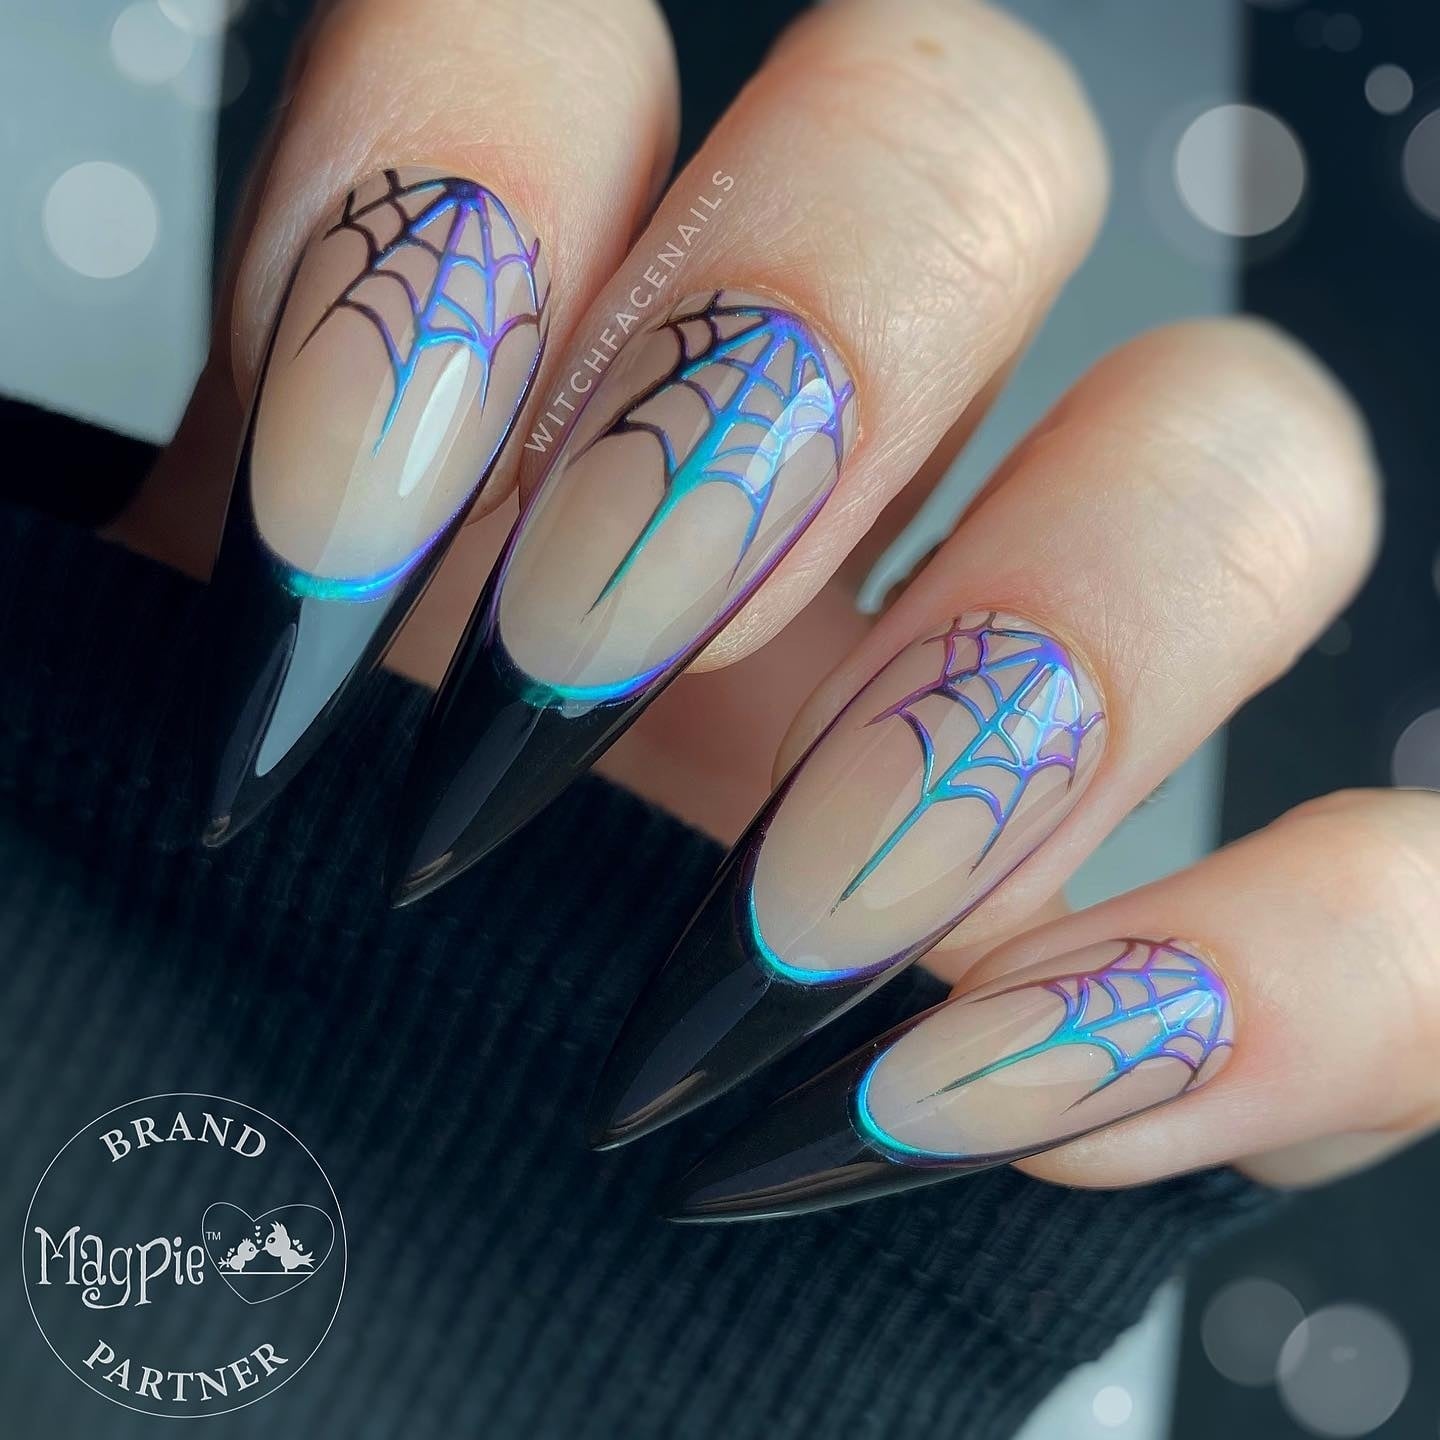 Goth french nails with spider web